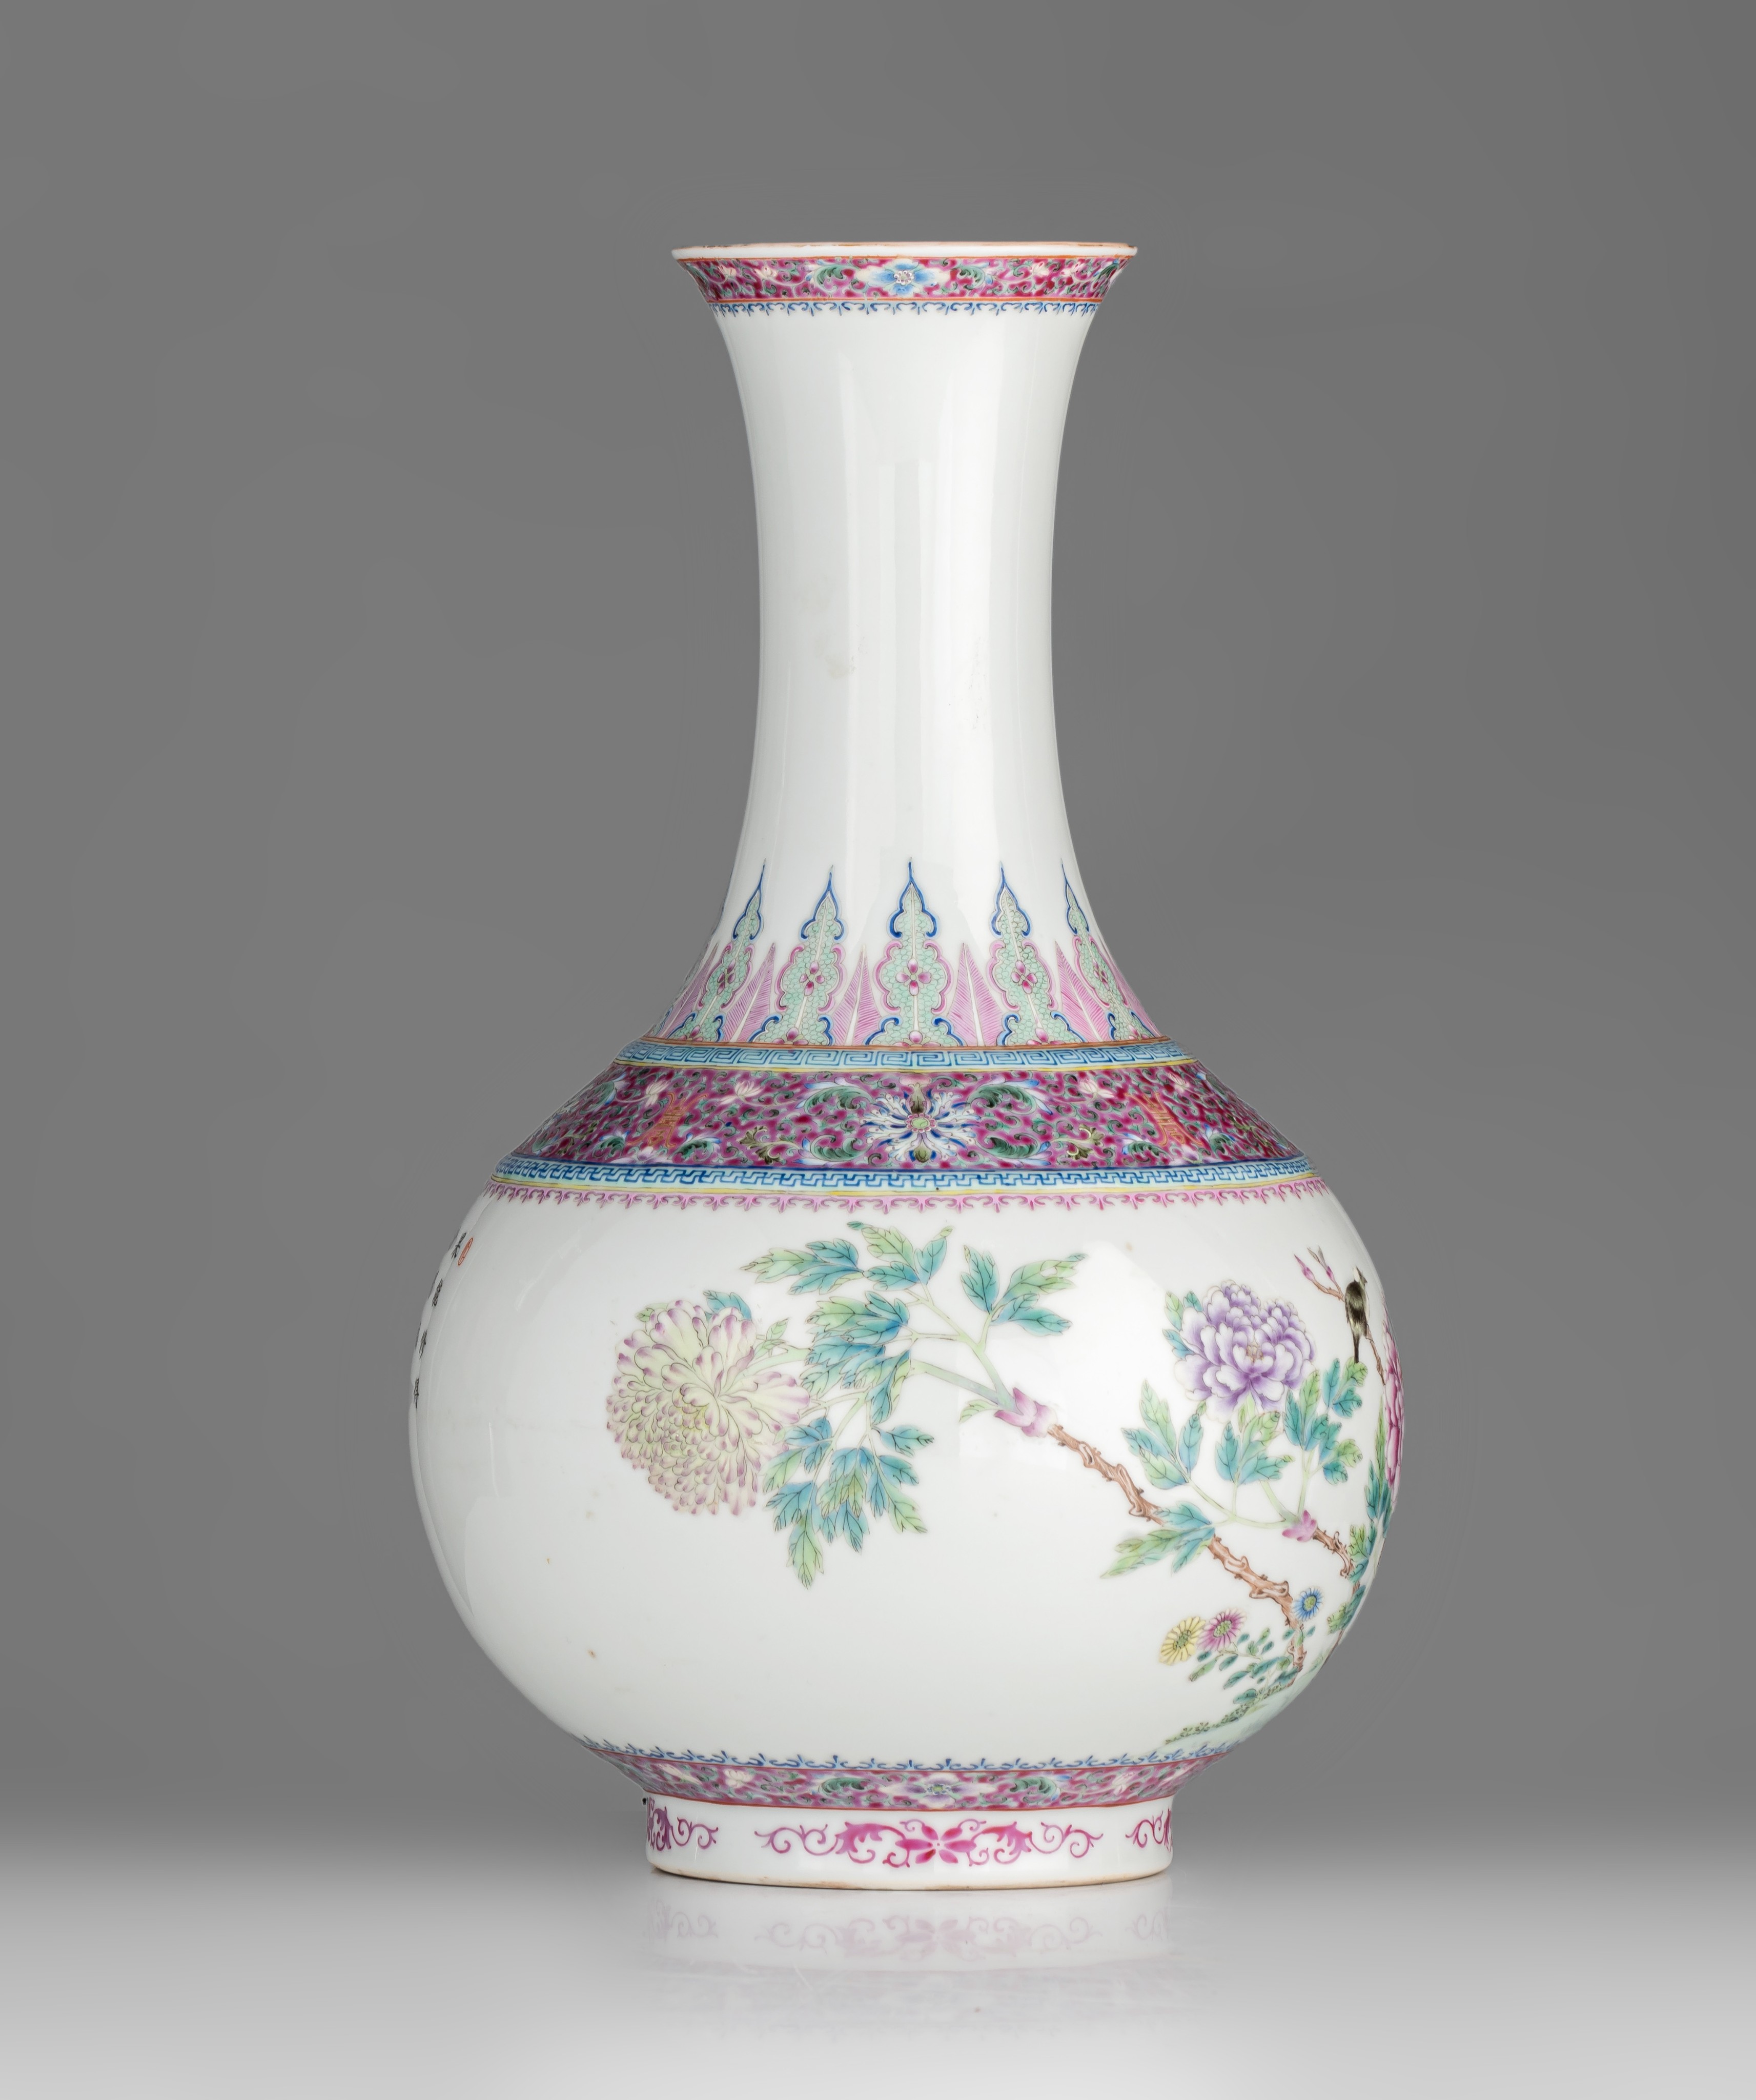 A fine Chinese famille rose 'Birds and Flowers' bottle vase, with a Qianlong mark, Republic period, - Image 6 of 9